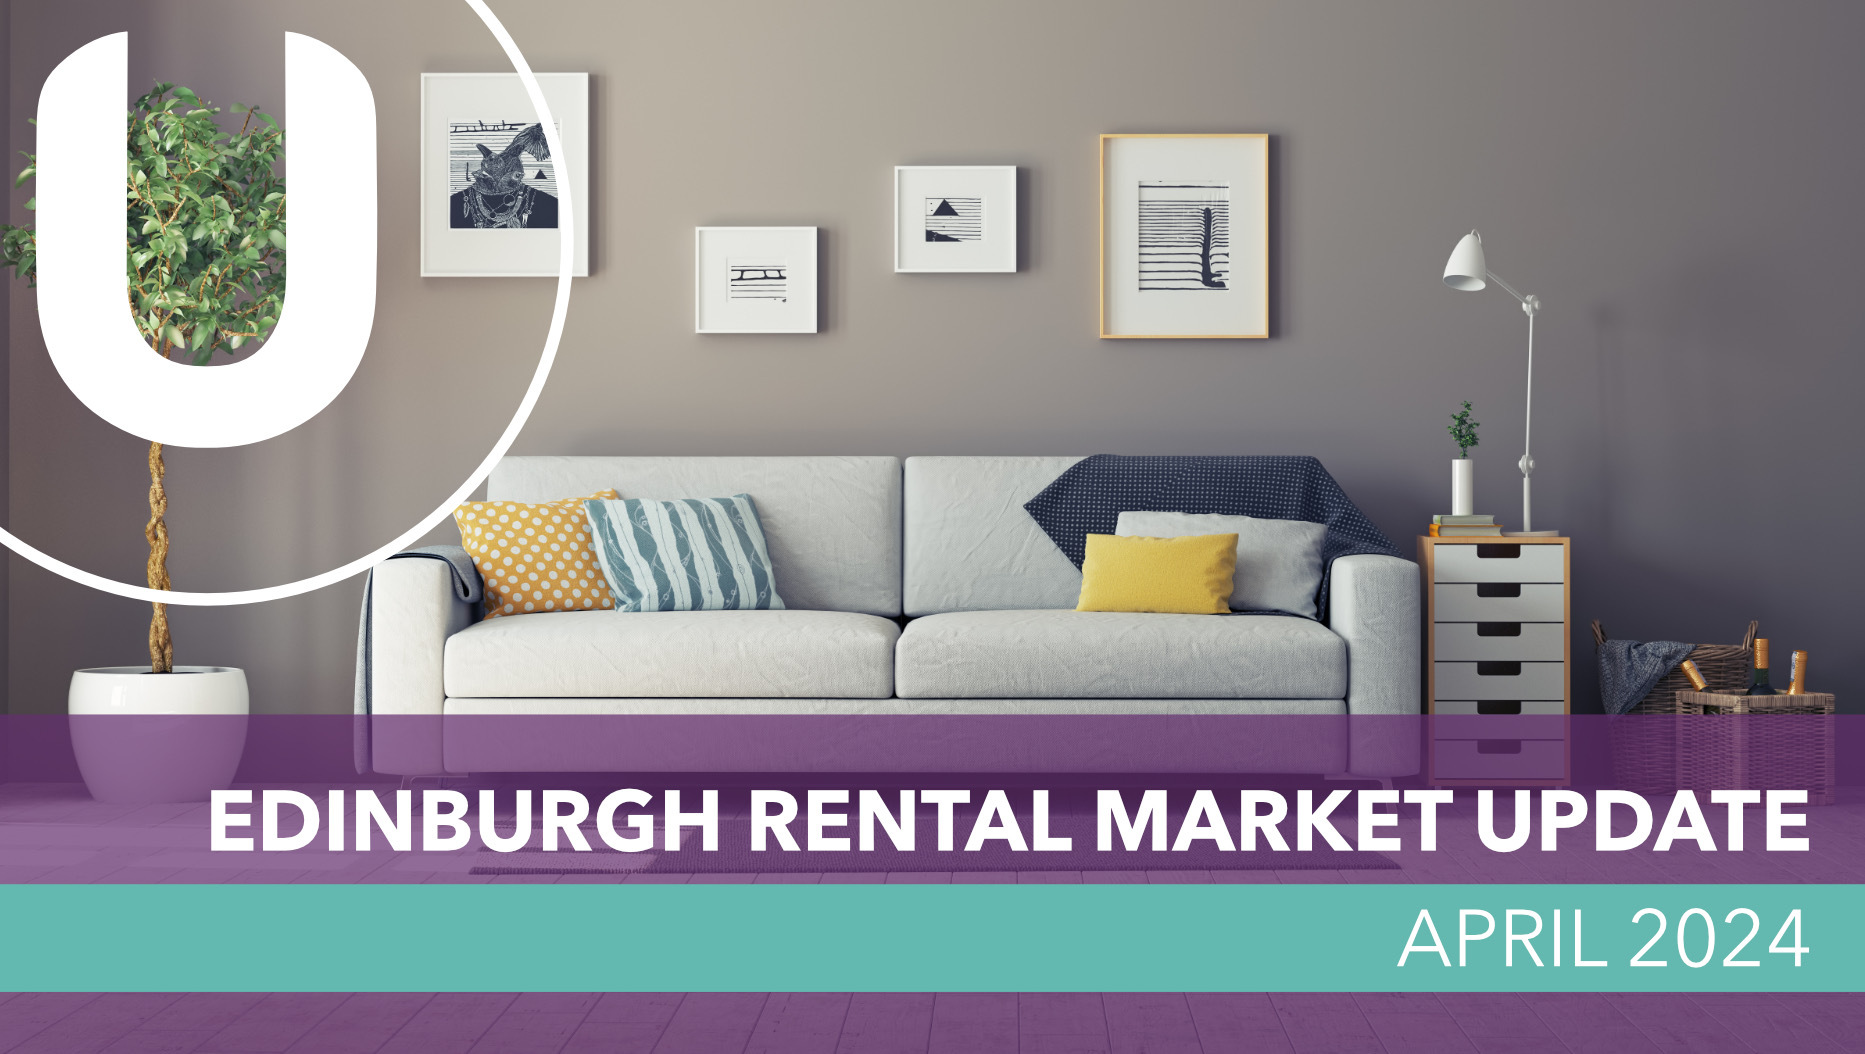 The PRS continues to shrink and rents continue to rise